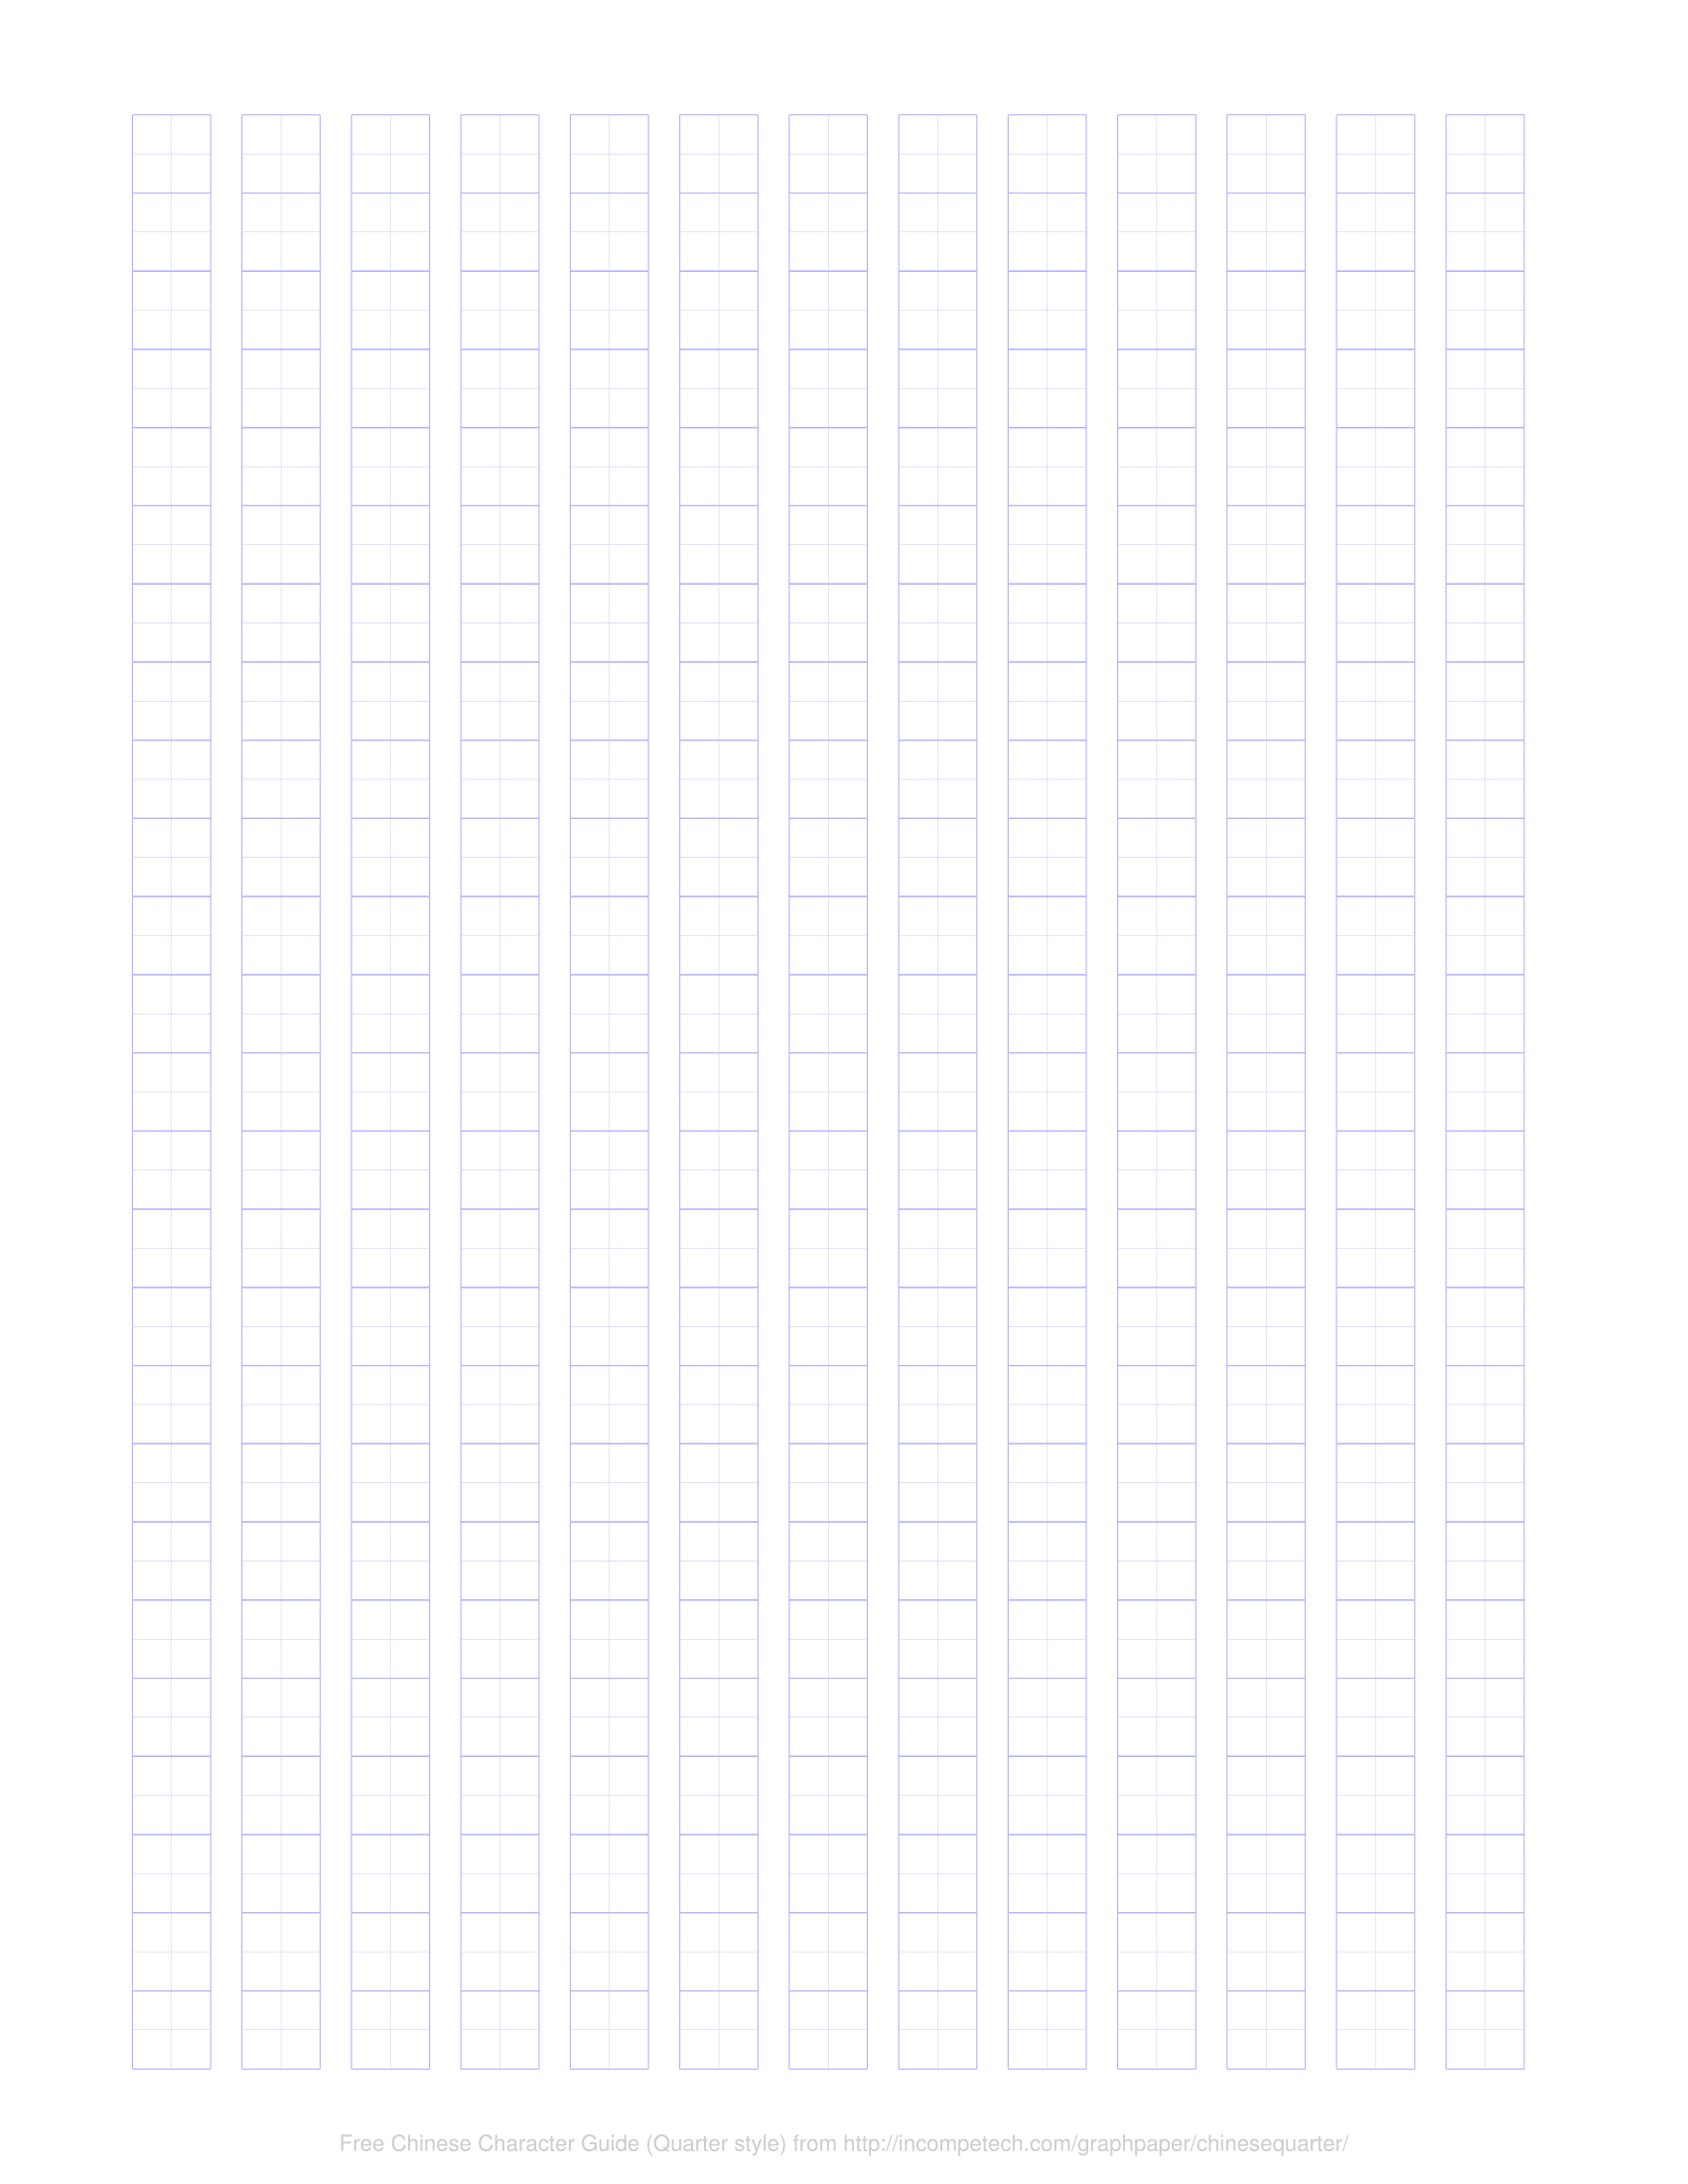 Free Online Graph Paper / Chinese Character Guide (Quarters style)